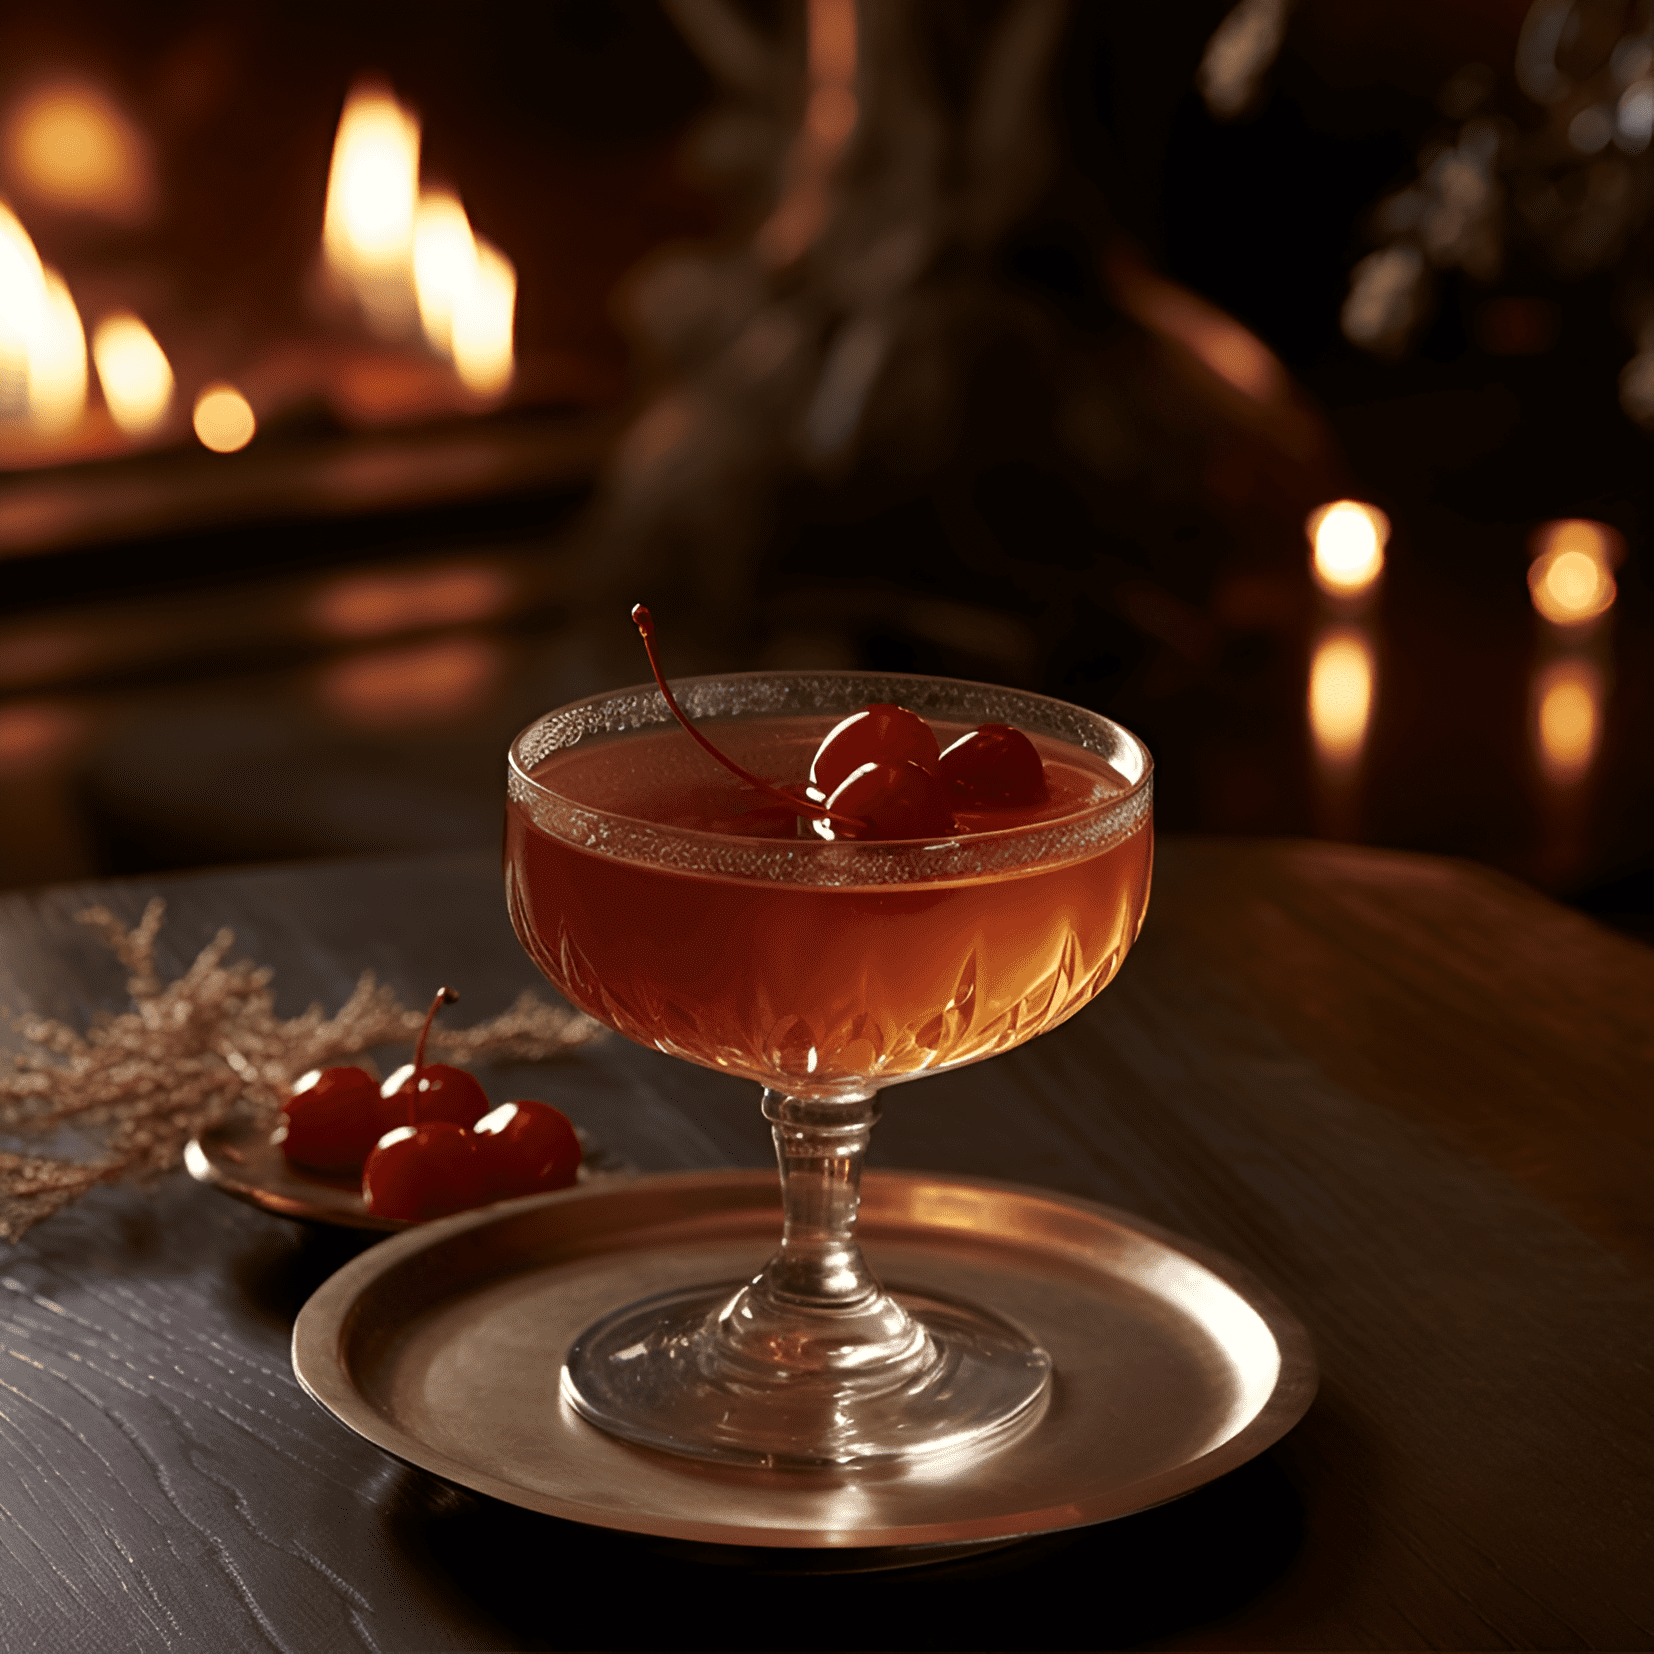 Red Hook Cocktail Recipe - The Red Hook cocktail is a well-balanced mix of sweet, bitter, and strong flavors. It has a rich, velvety texture with a hint of spice from the rye whiskey, and a pleasant bitterness from the Punt e Mes and maraschino liqueur.